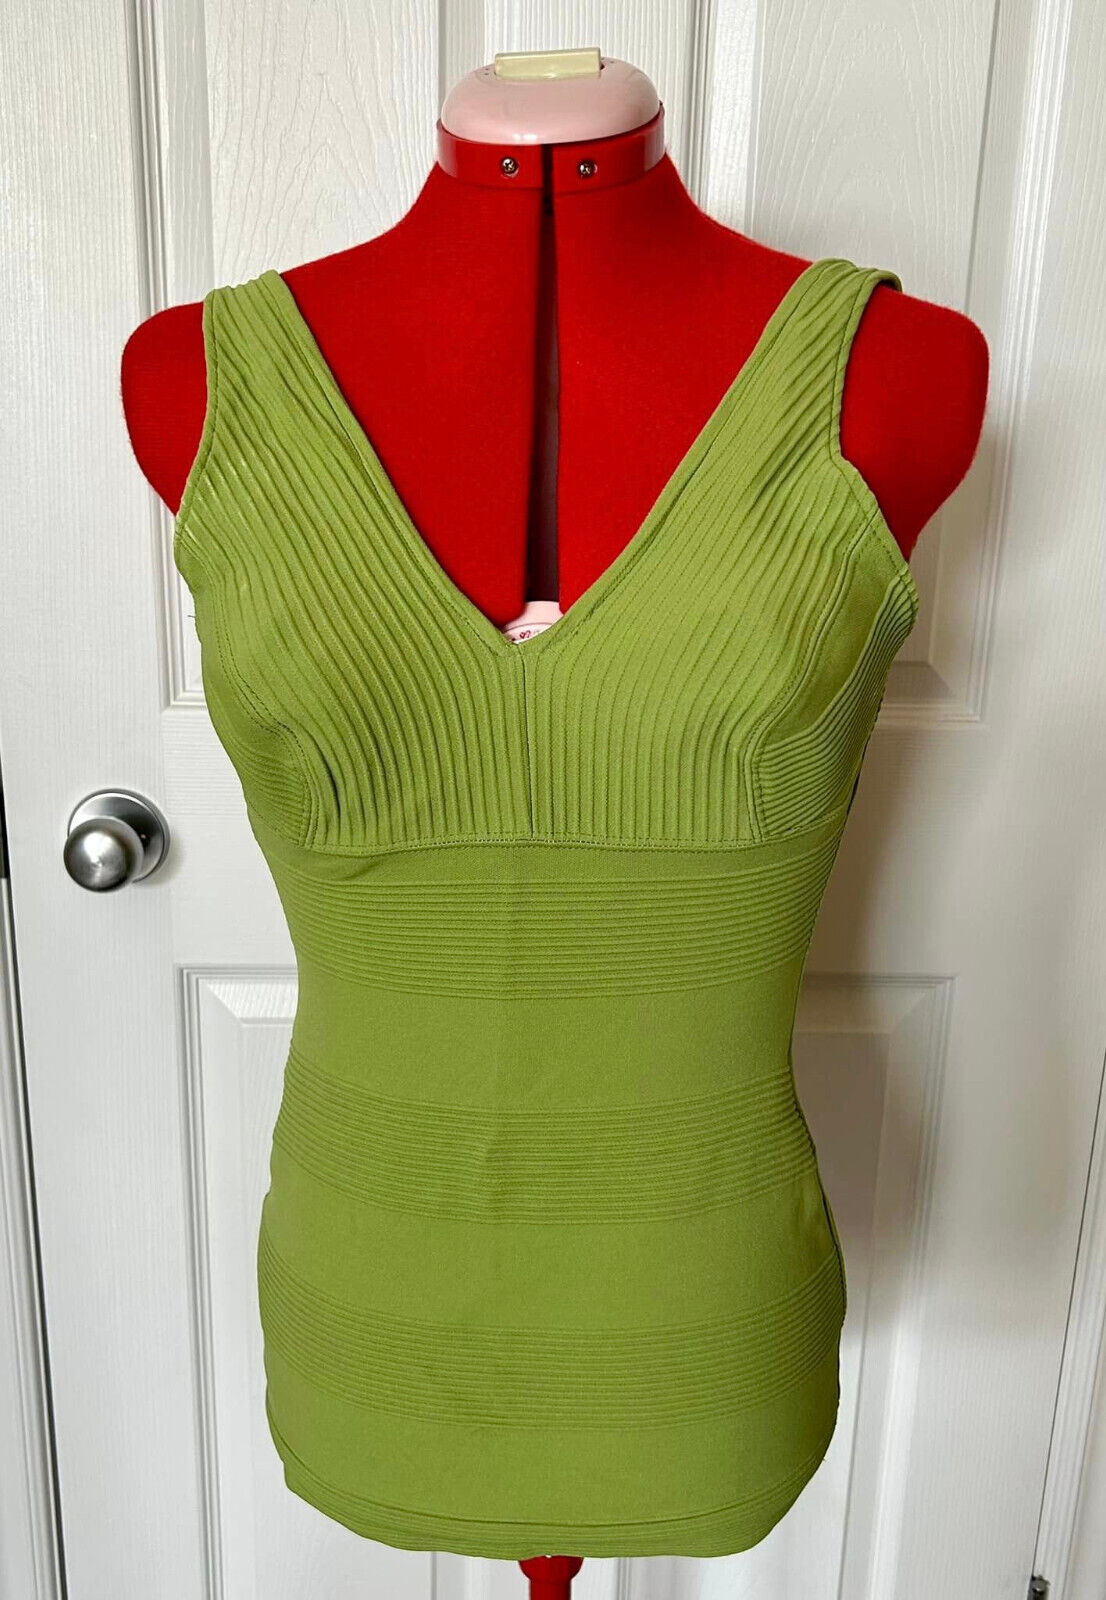 Vintage 1950/60s Catalina chartreuse green chevron striped swimsuit size 14